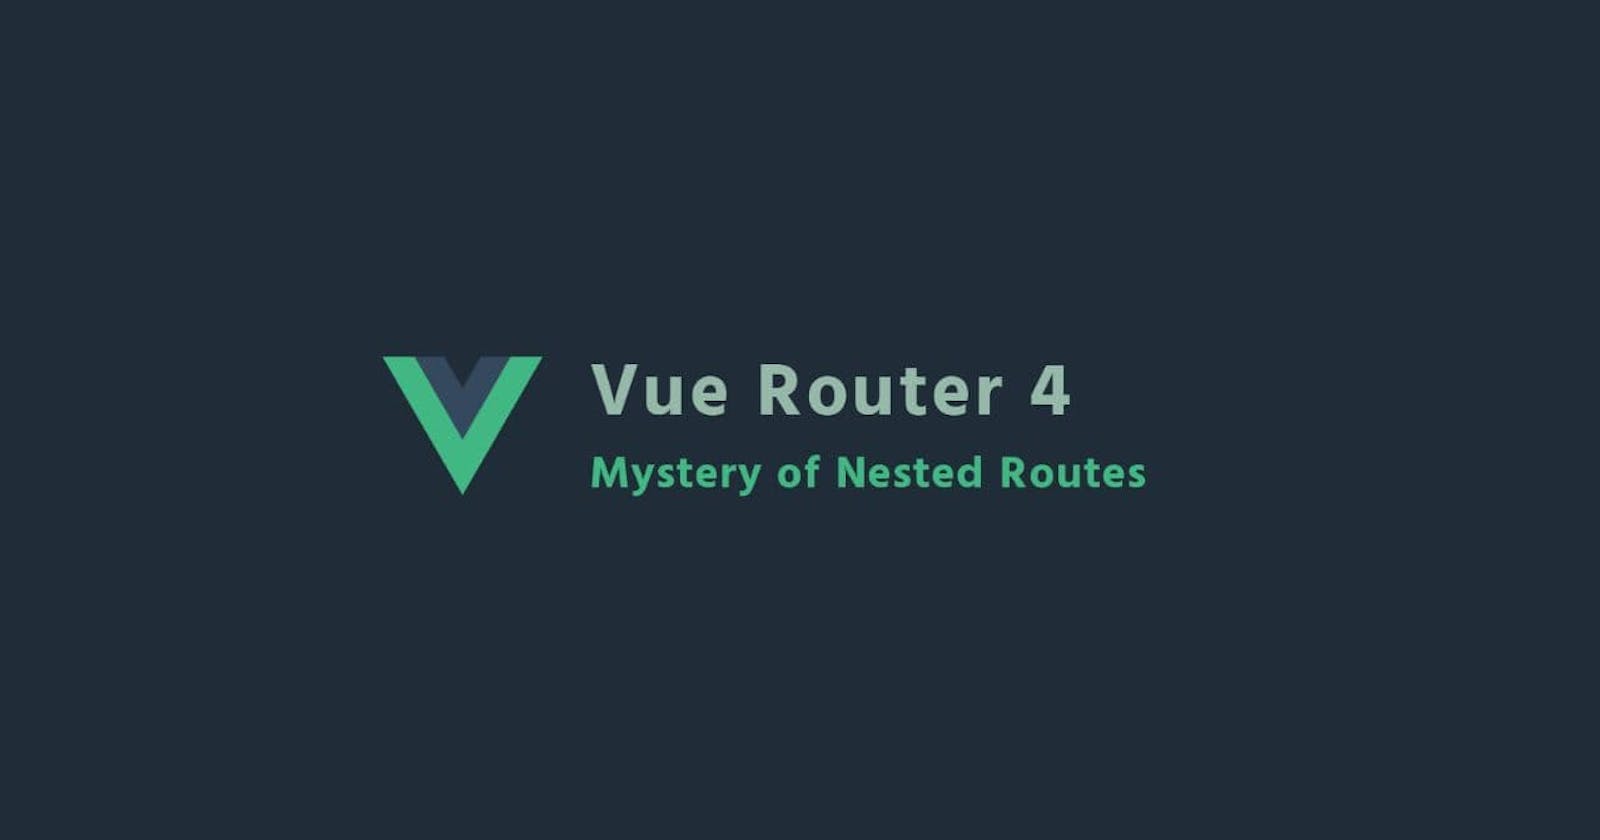 Vue Router 4 - Mystery of Nested Routes